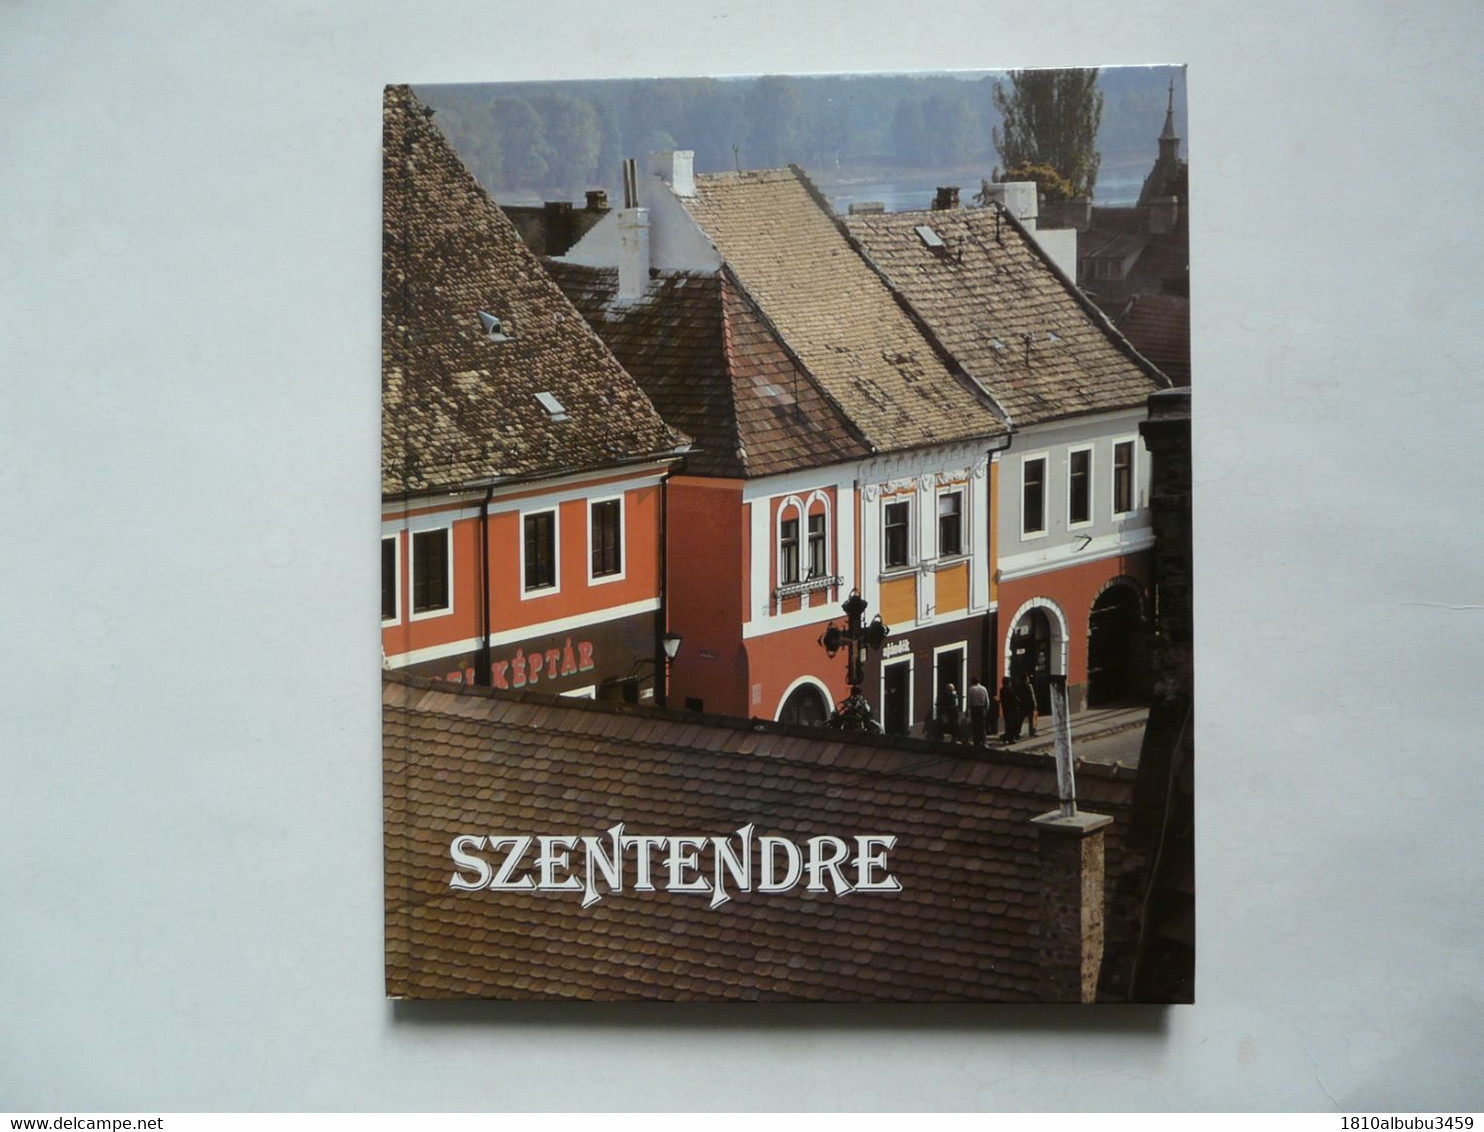 SZENTENDRE With 101 Colour Photographs By Gyula TAHIN - Culture